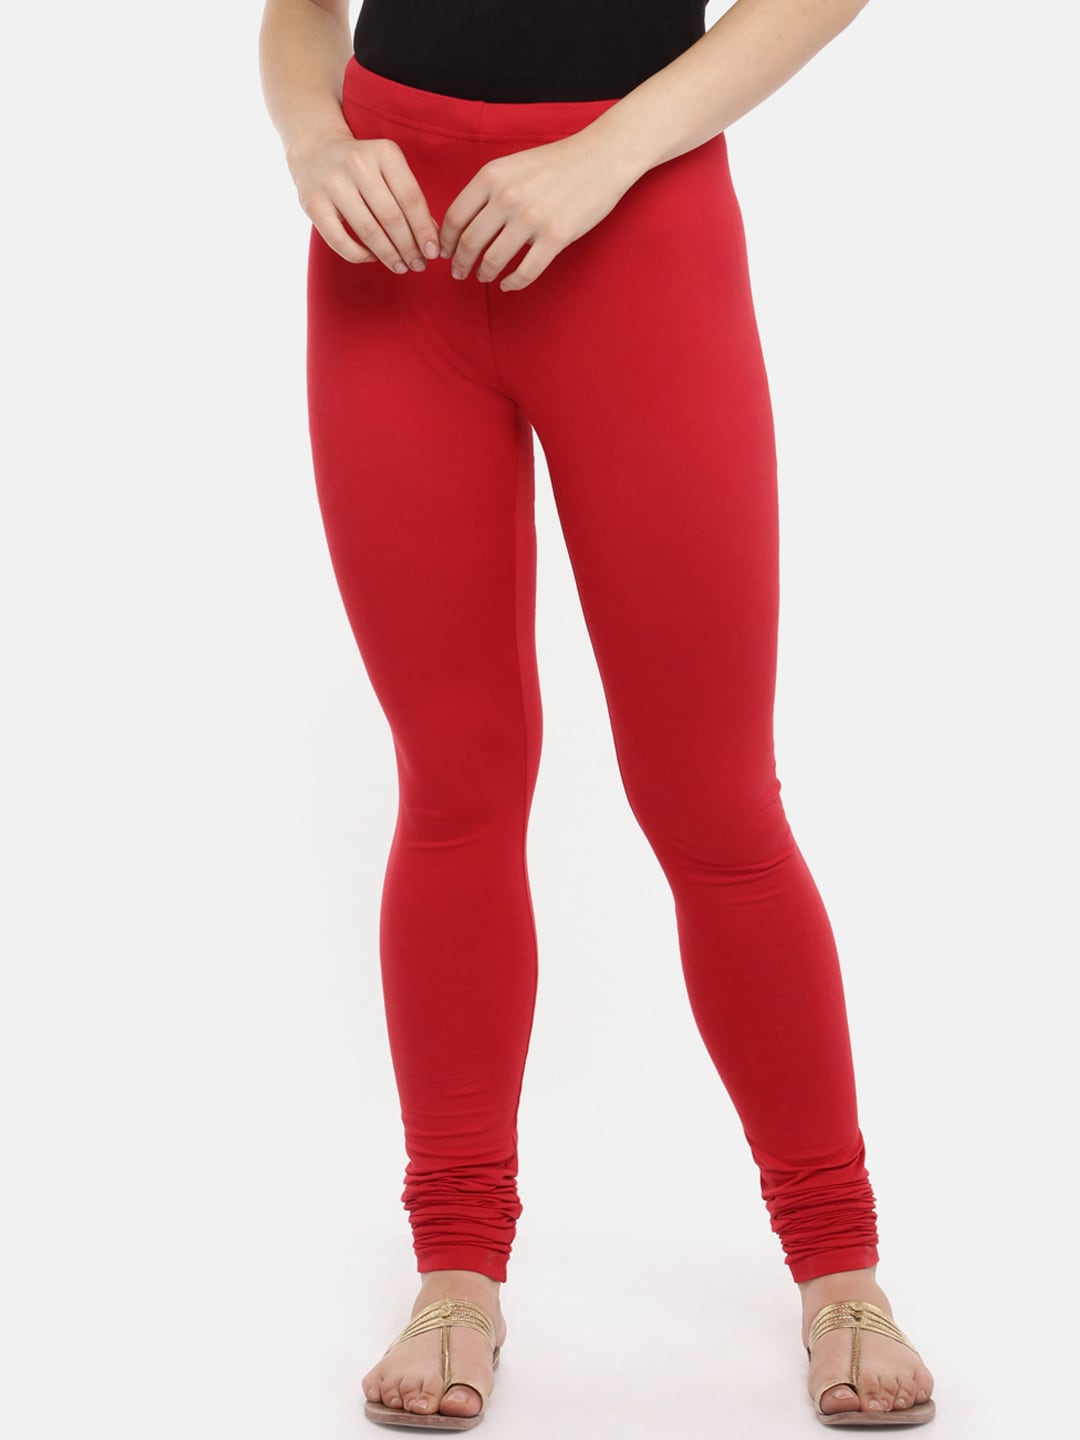 RANGMANCH BY PANTALOONS Women Red Solid Slim Fit Leggings Price in India,  Full Specifications & Offers